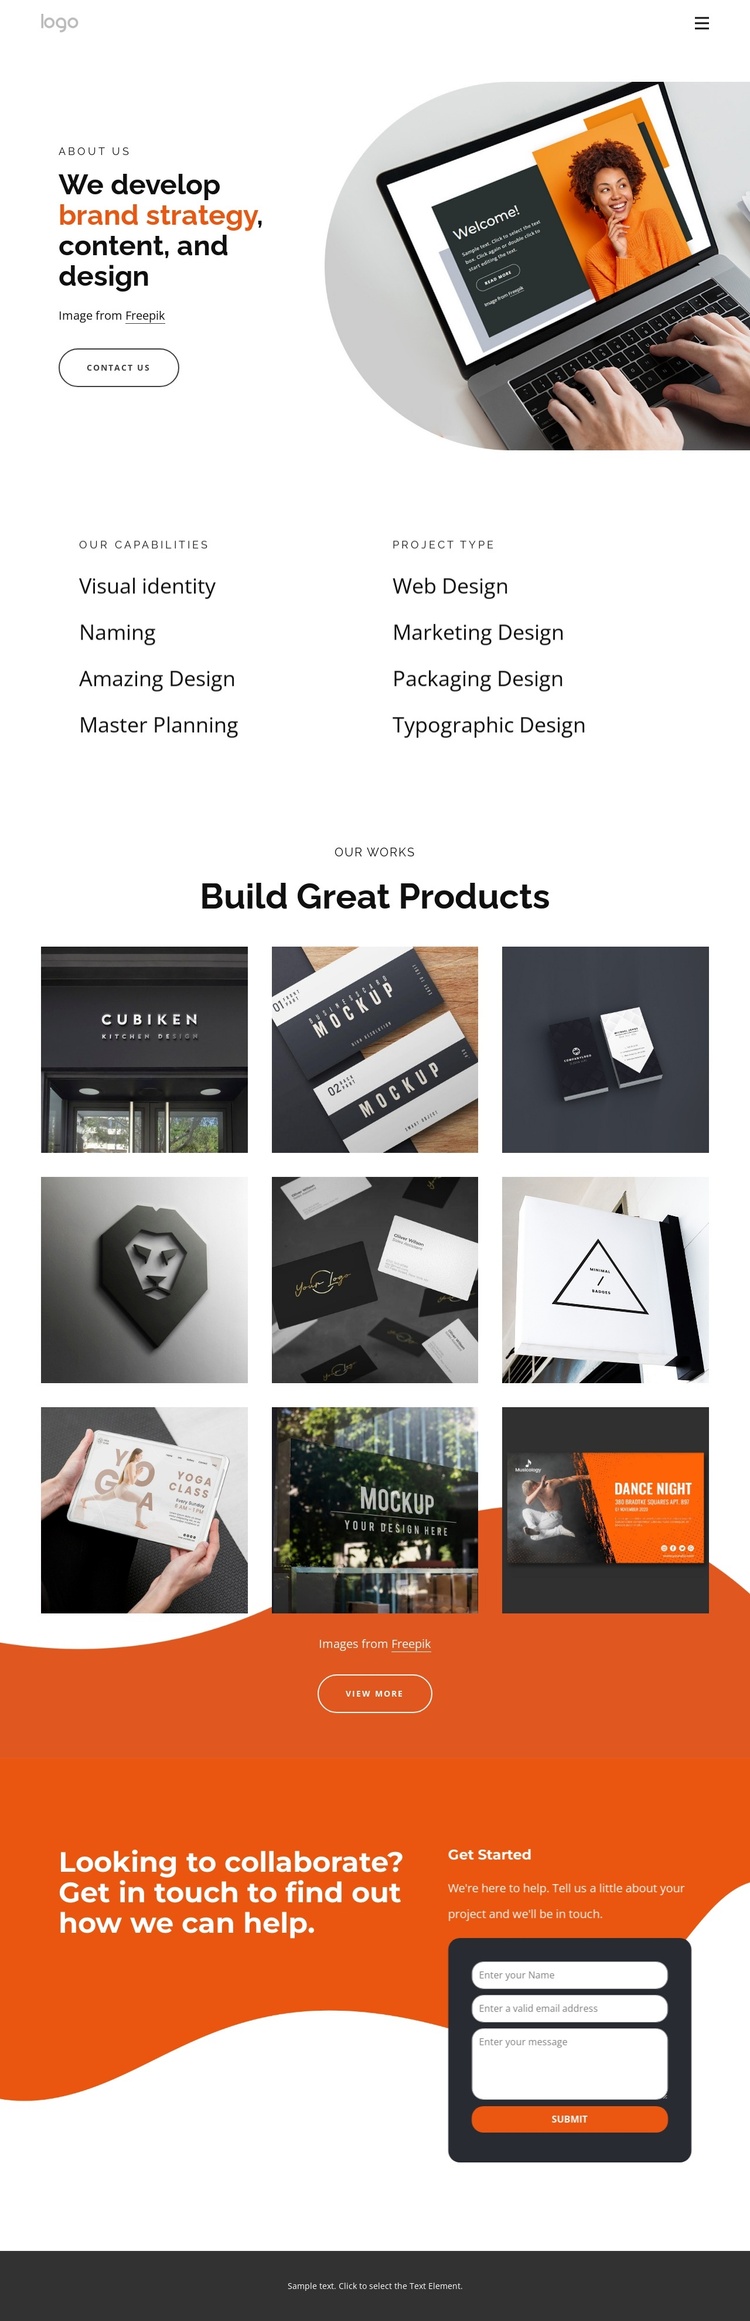 We create thoughtful experiences for humans Joomla Template